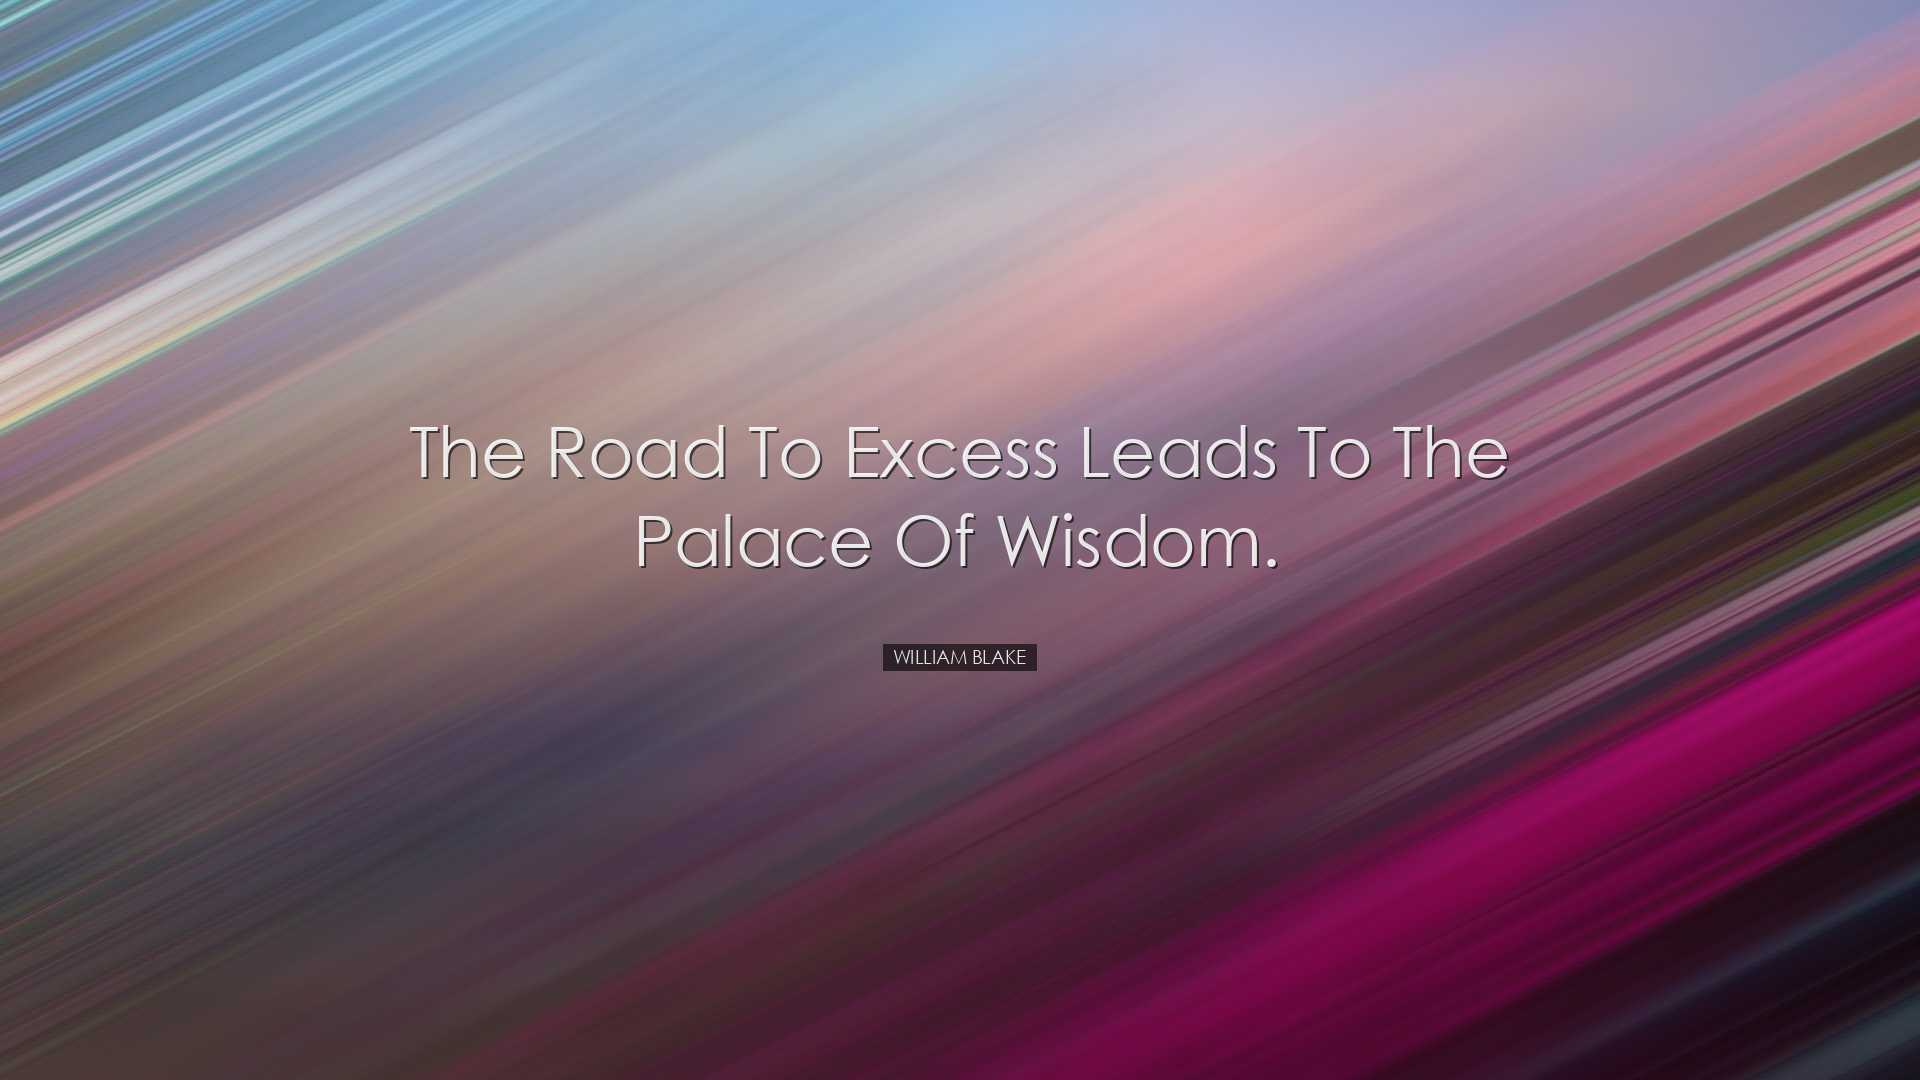 The road to excess leads to the palace of wisdom. - William Blake